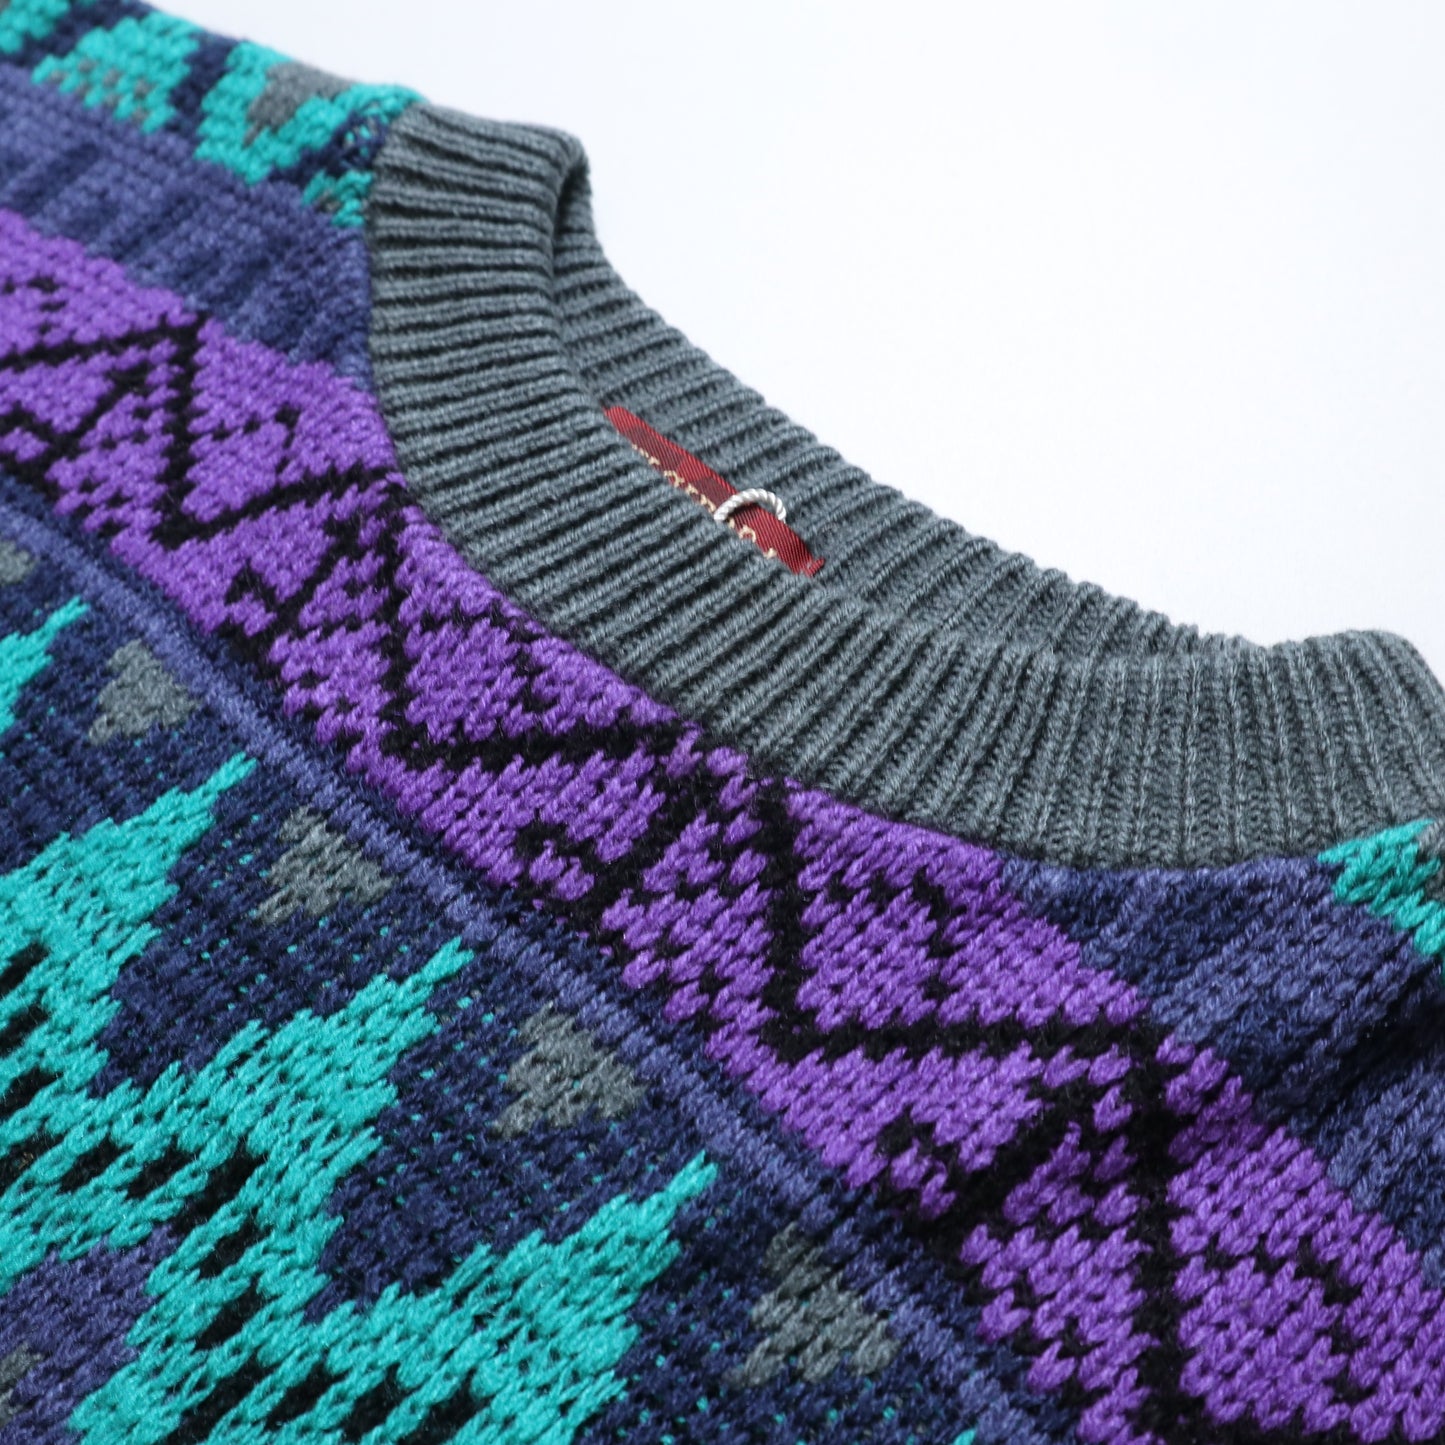 90s USA-made green and purple geometric graphic short sweater